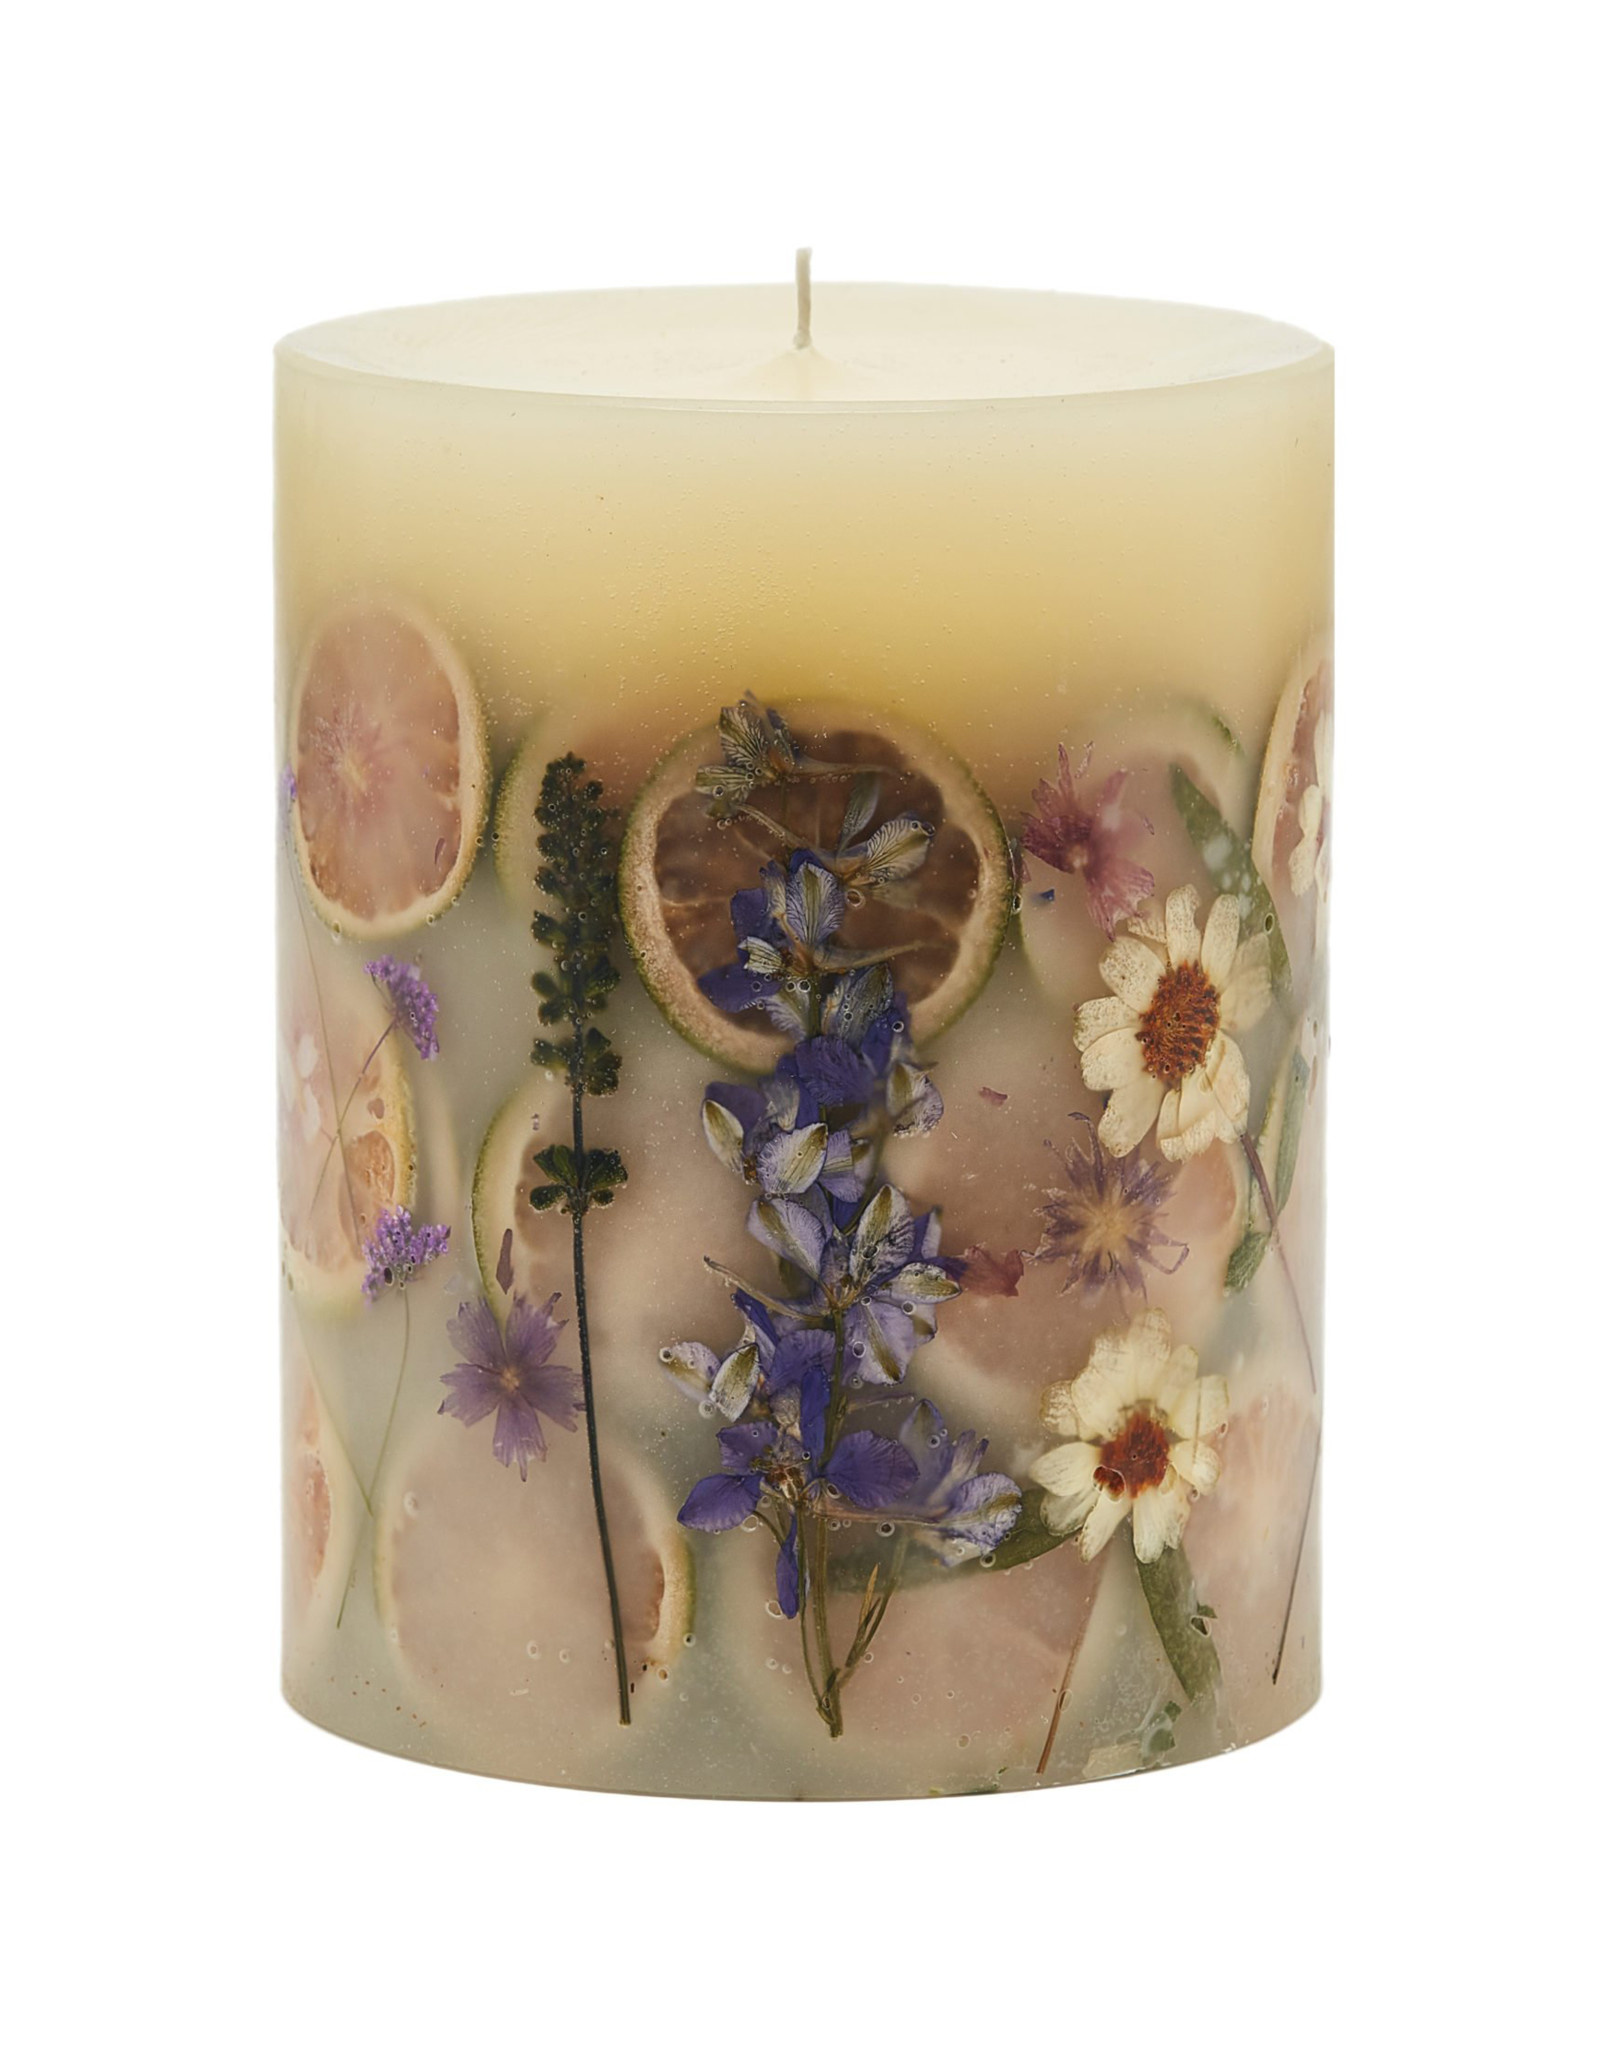 Homemade Pressed Lavender Candle (With Real Lavender!) - Garden